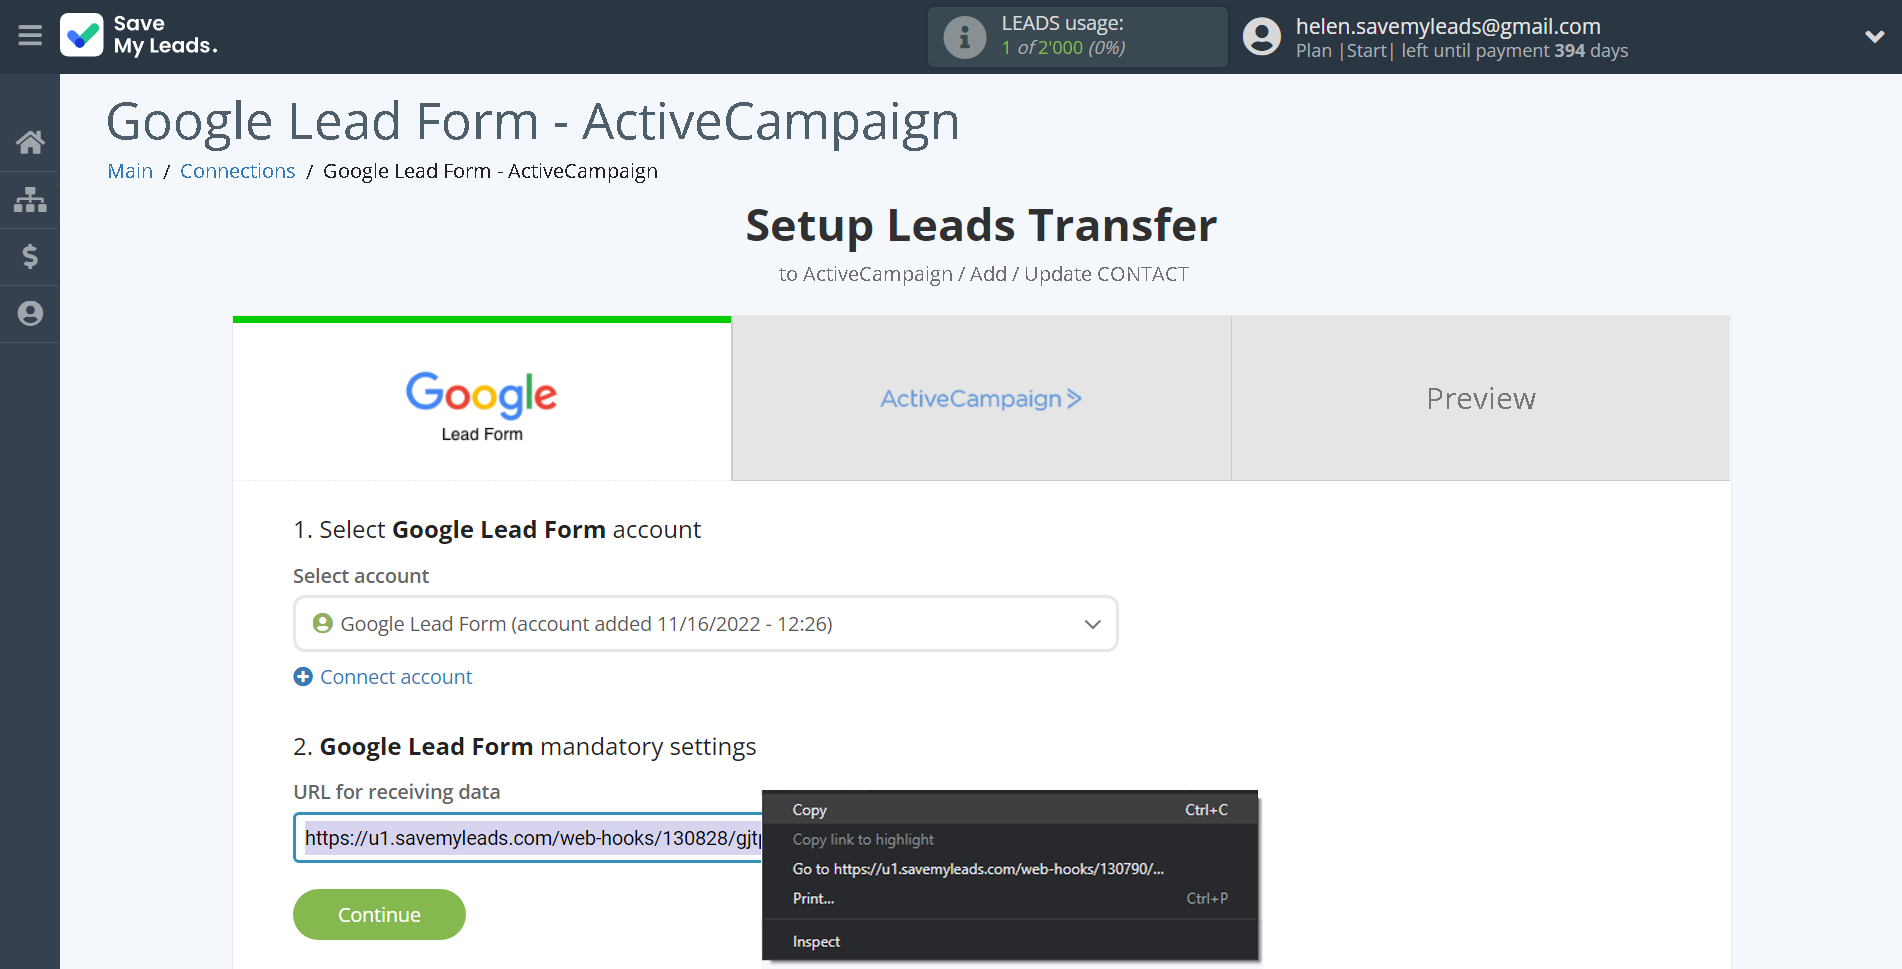 How to Connect Google Lead Form with ActiveCampaign Create Contacts | Data Source account connection